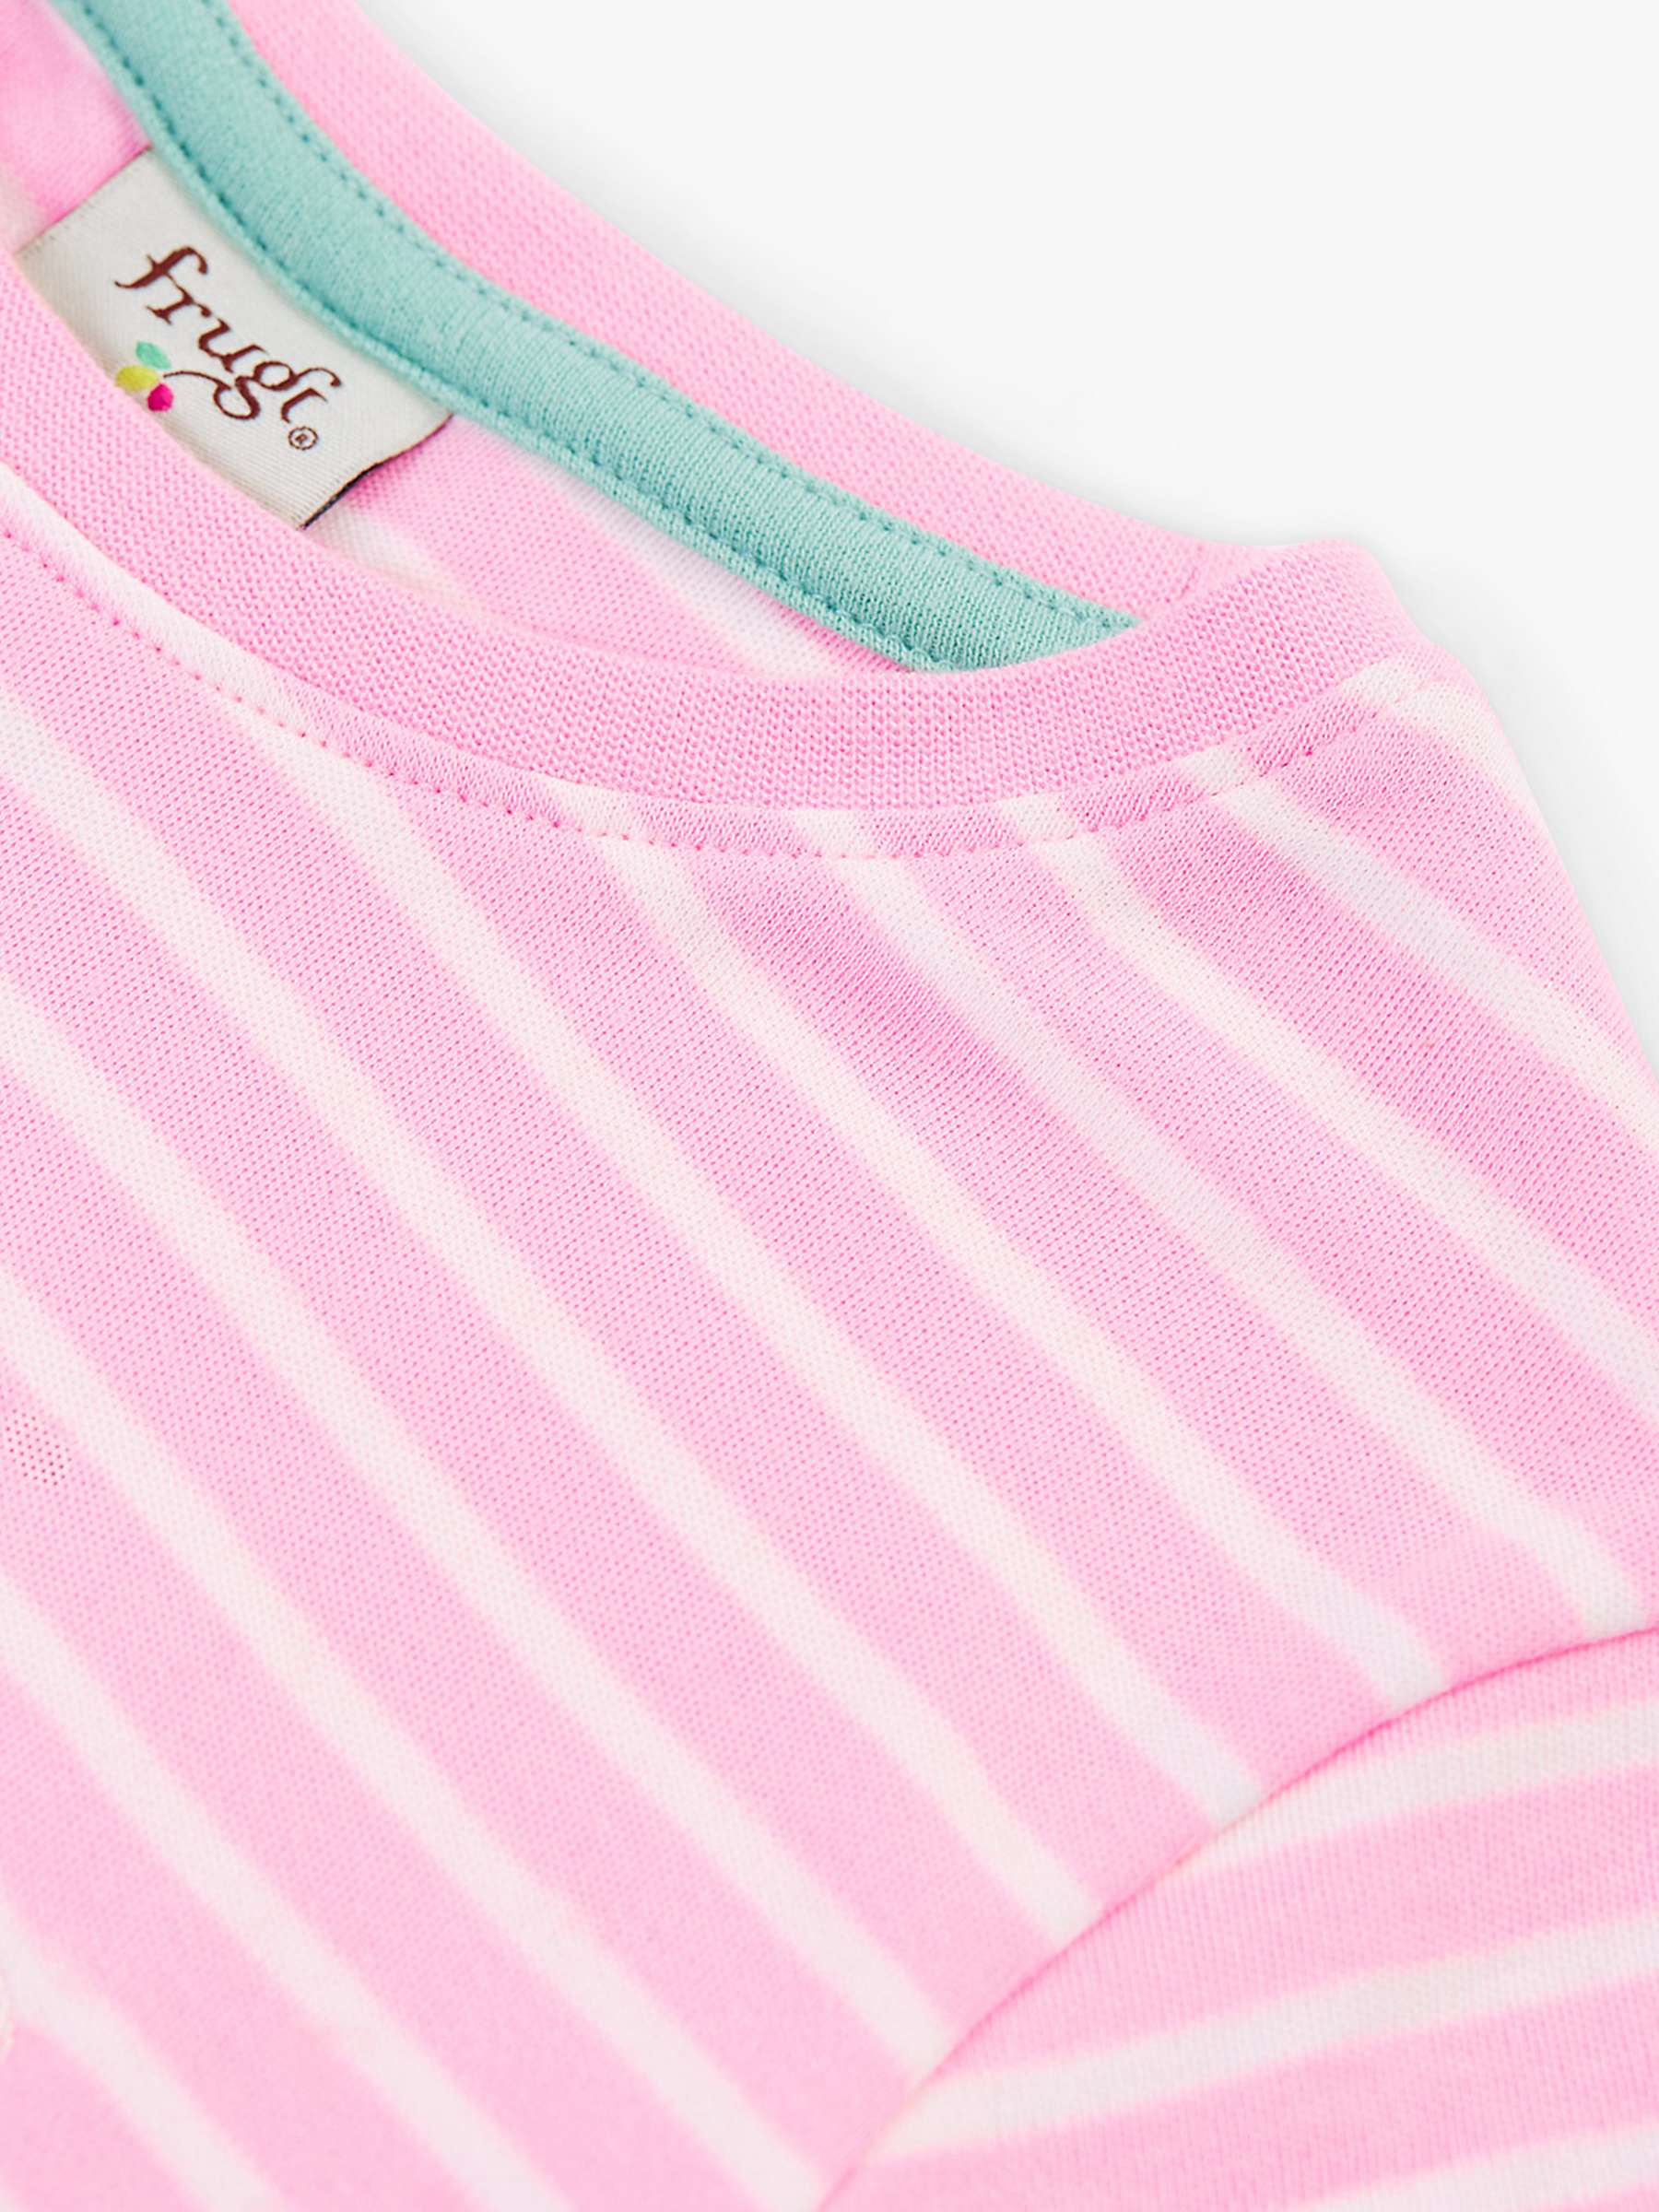 Buy Frugi Kids' Camille Bee Great Organic Cotton Applique T-Shirt, Pink/White Online at johnlewis.com